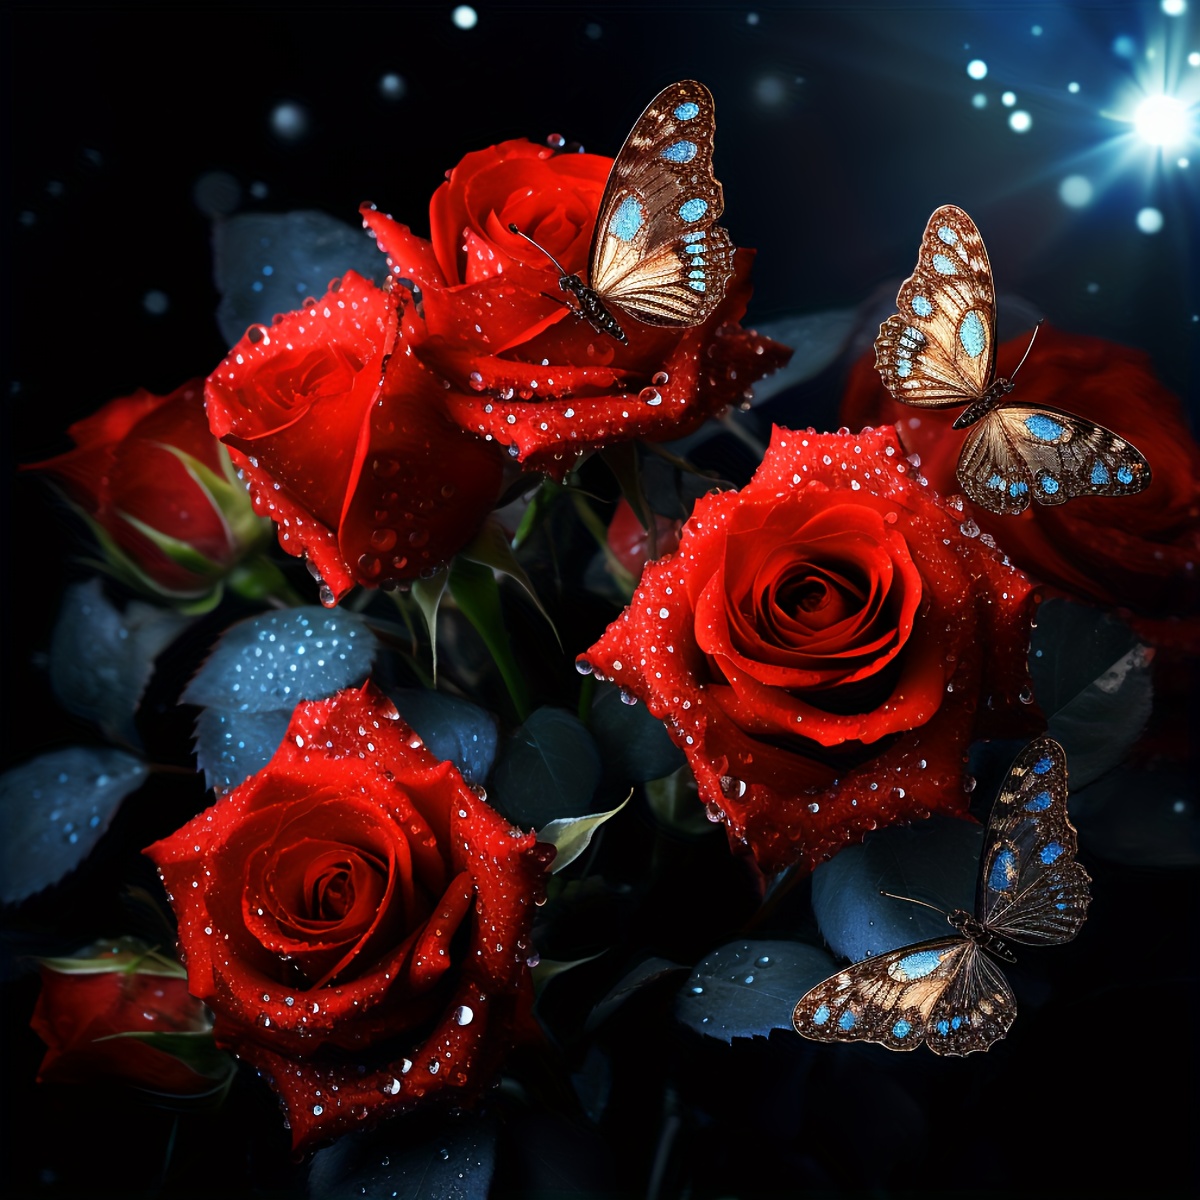 Flowers Butterfly Rose, 5D Diamond Painting Kits